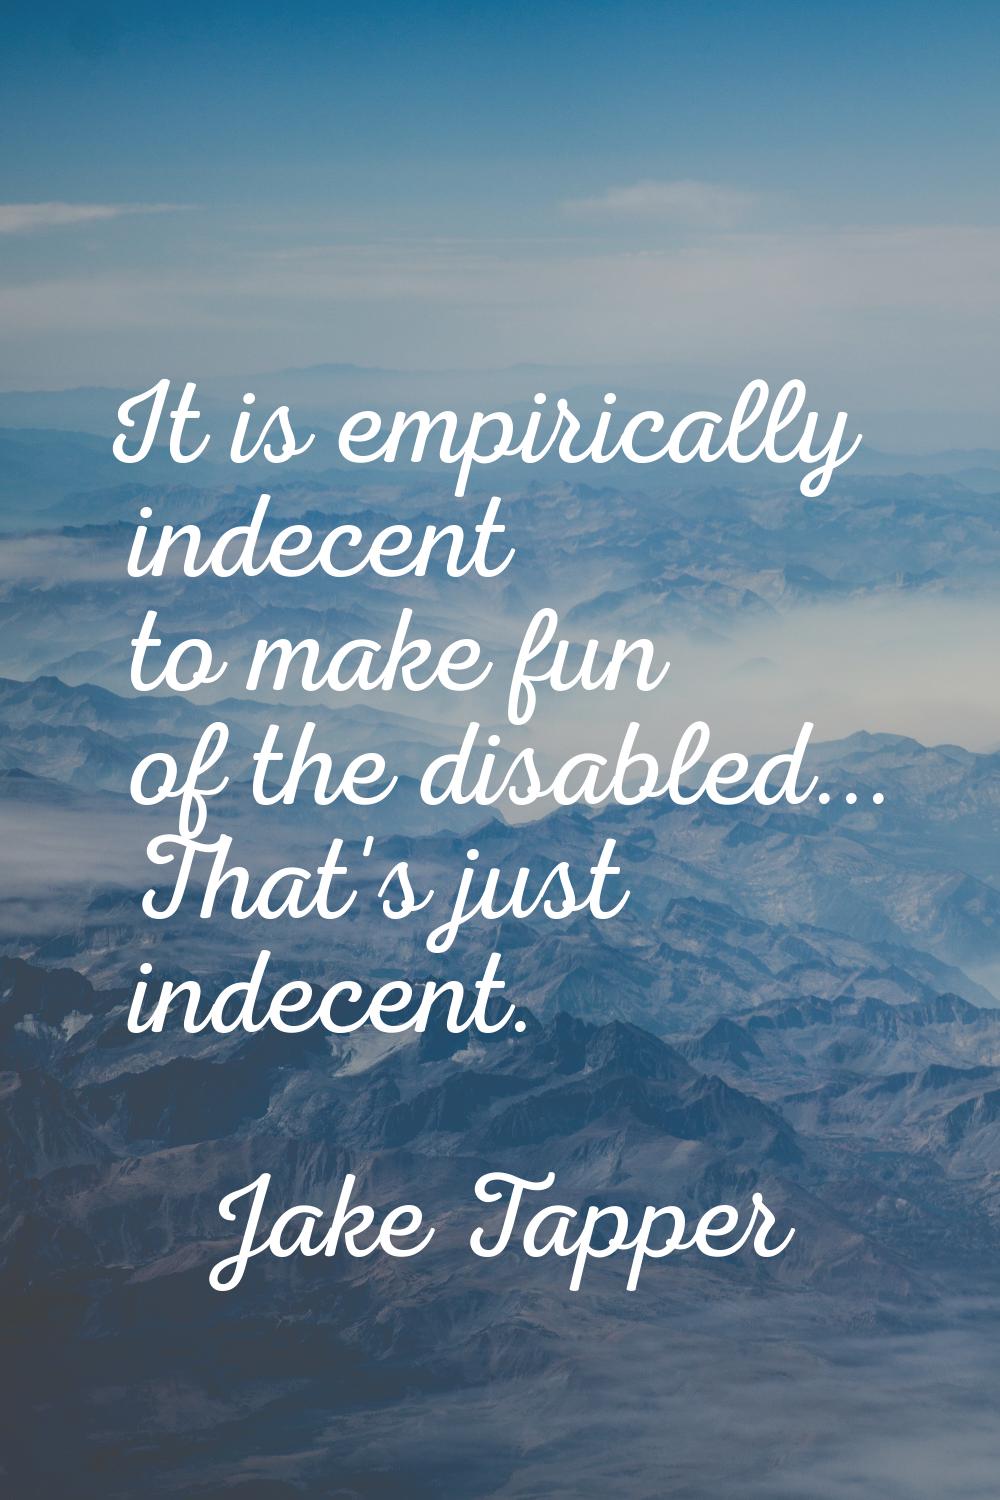 It is empirically indecent to make fun of the disabled... That's just indecent.